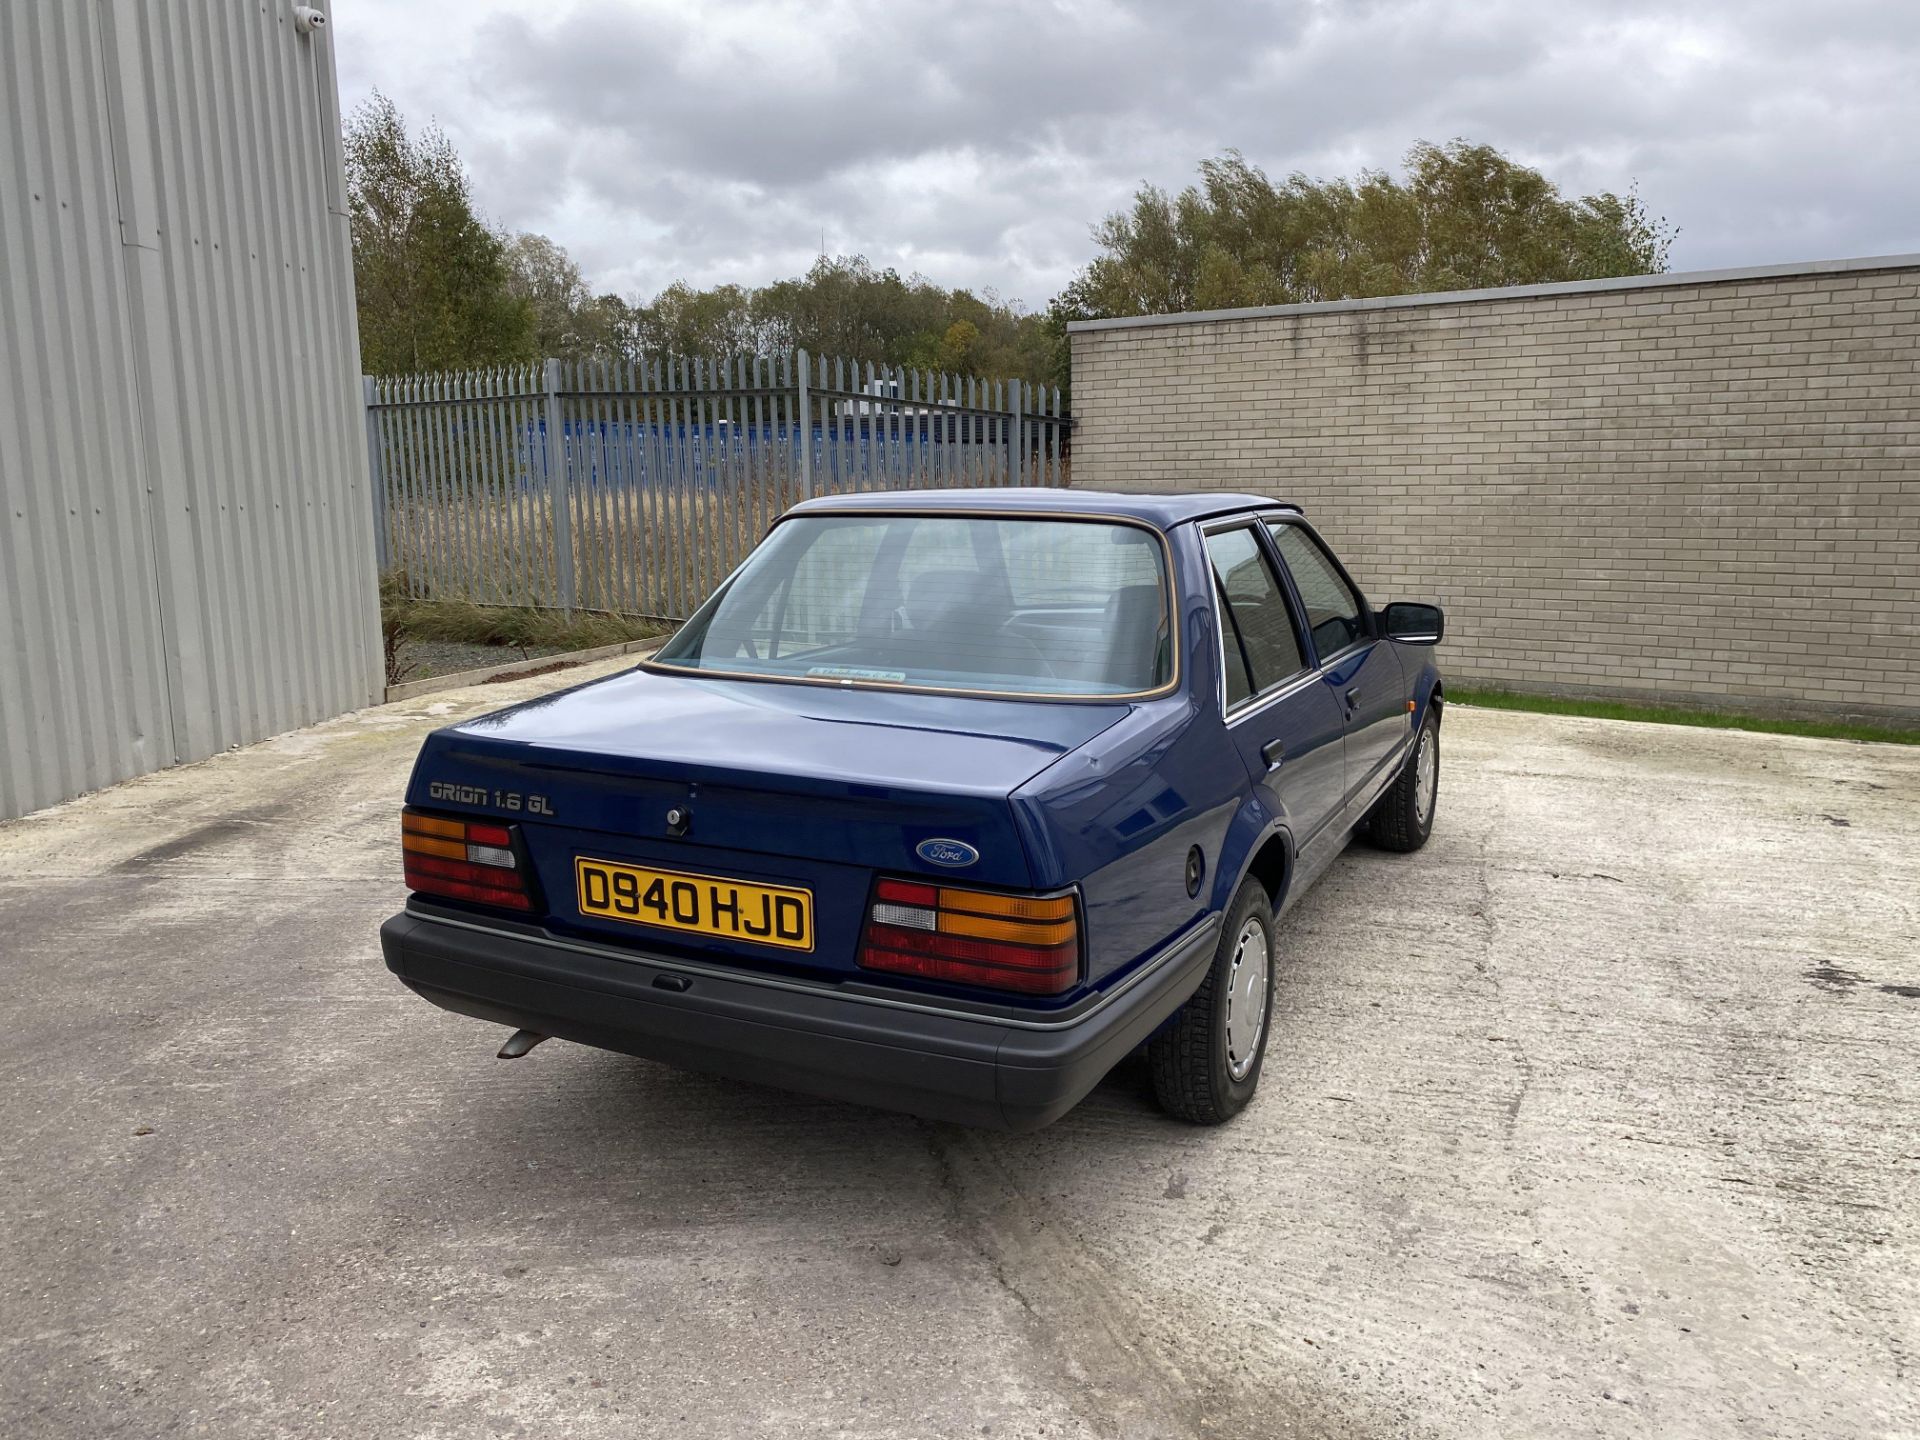 Ford Orion 1.6 GL - Image 4 of 42